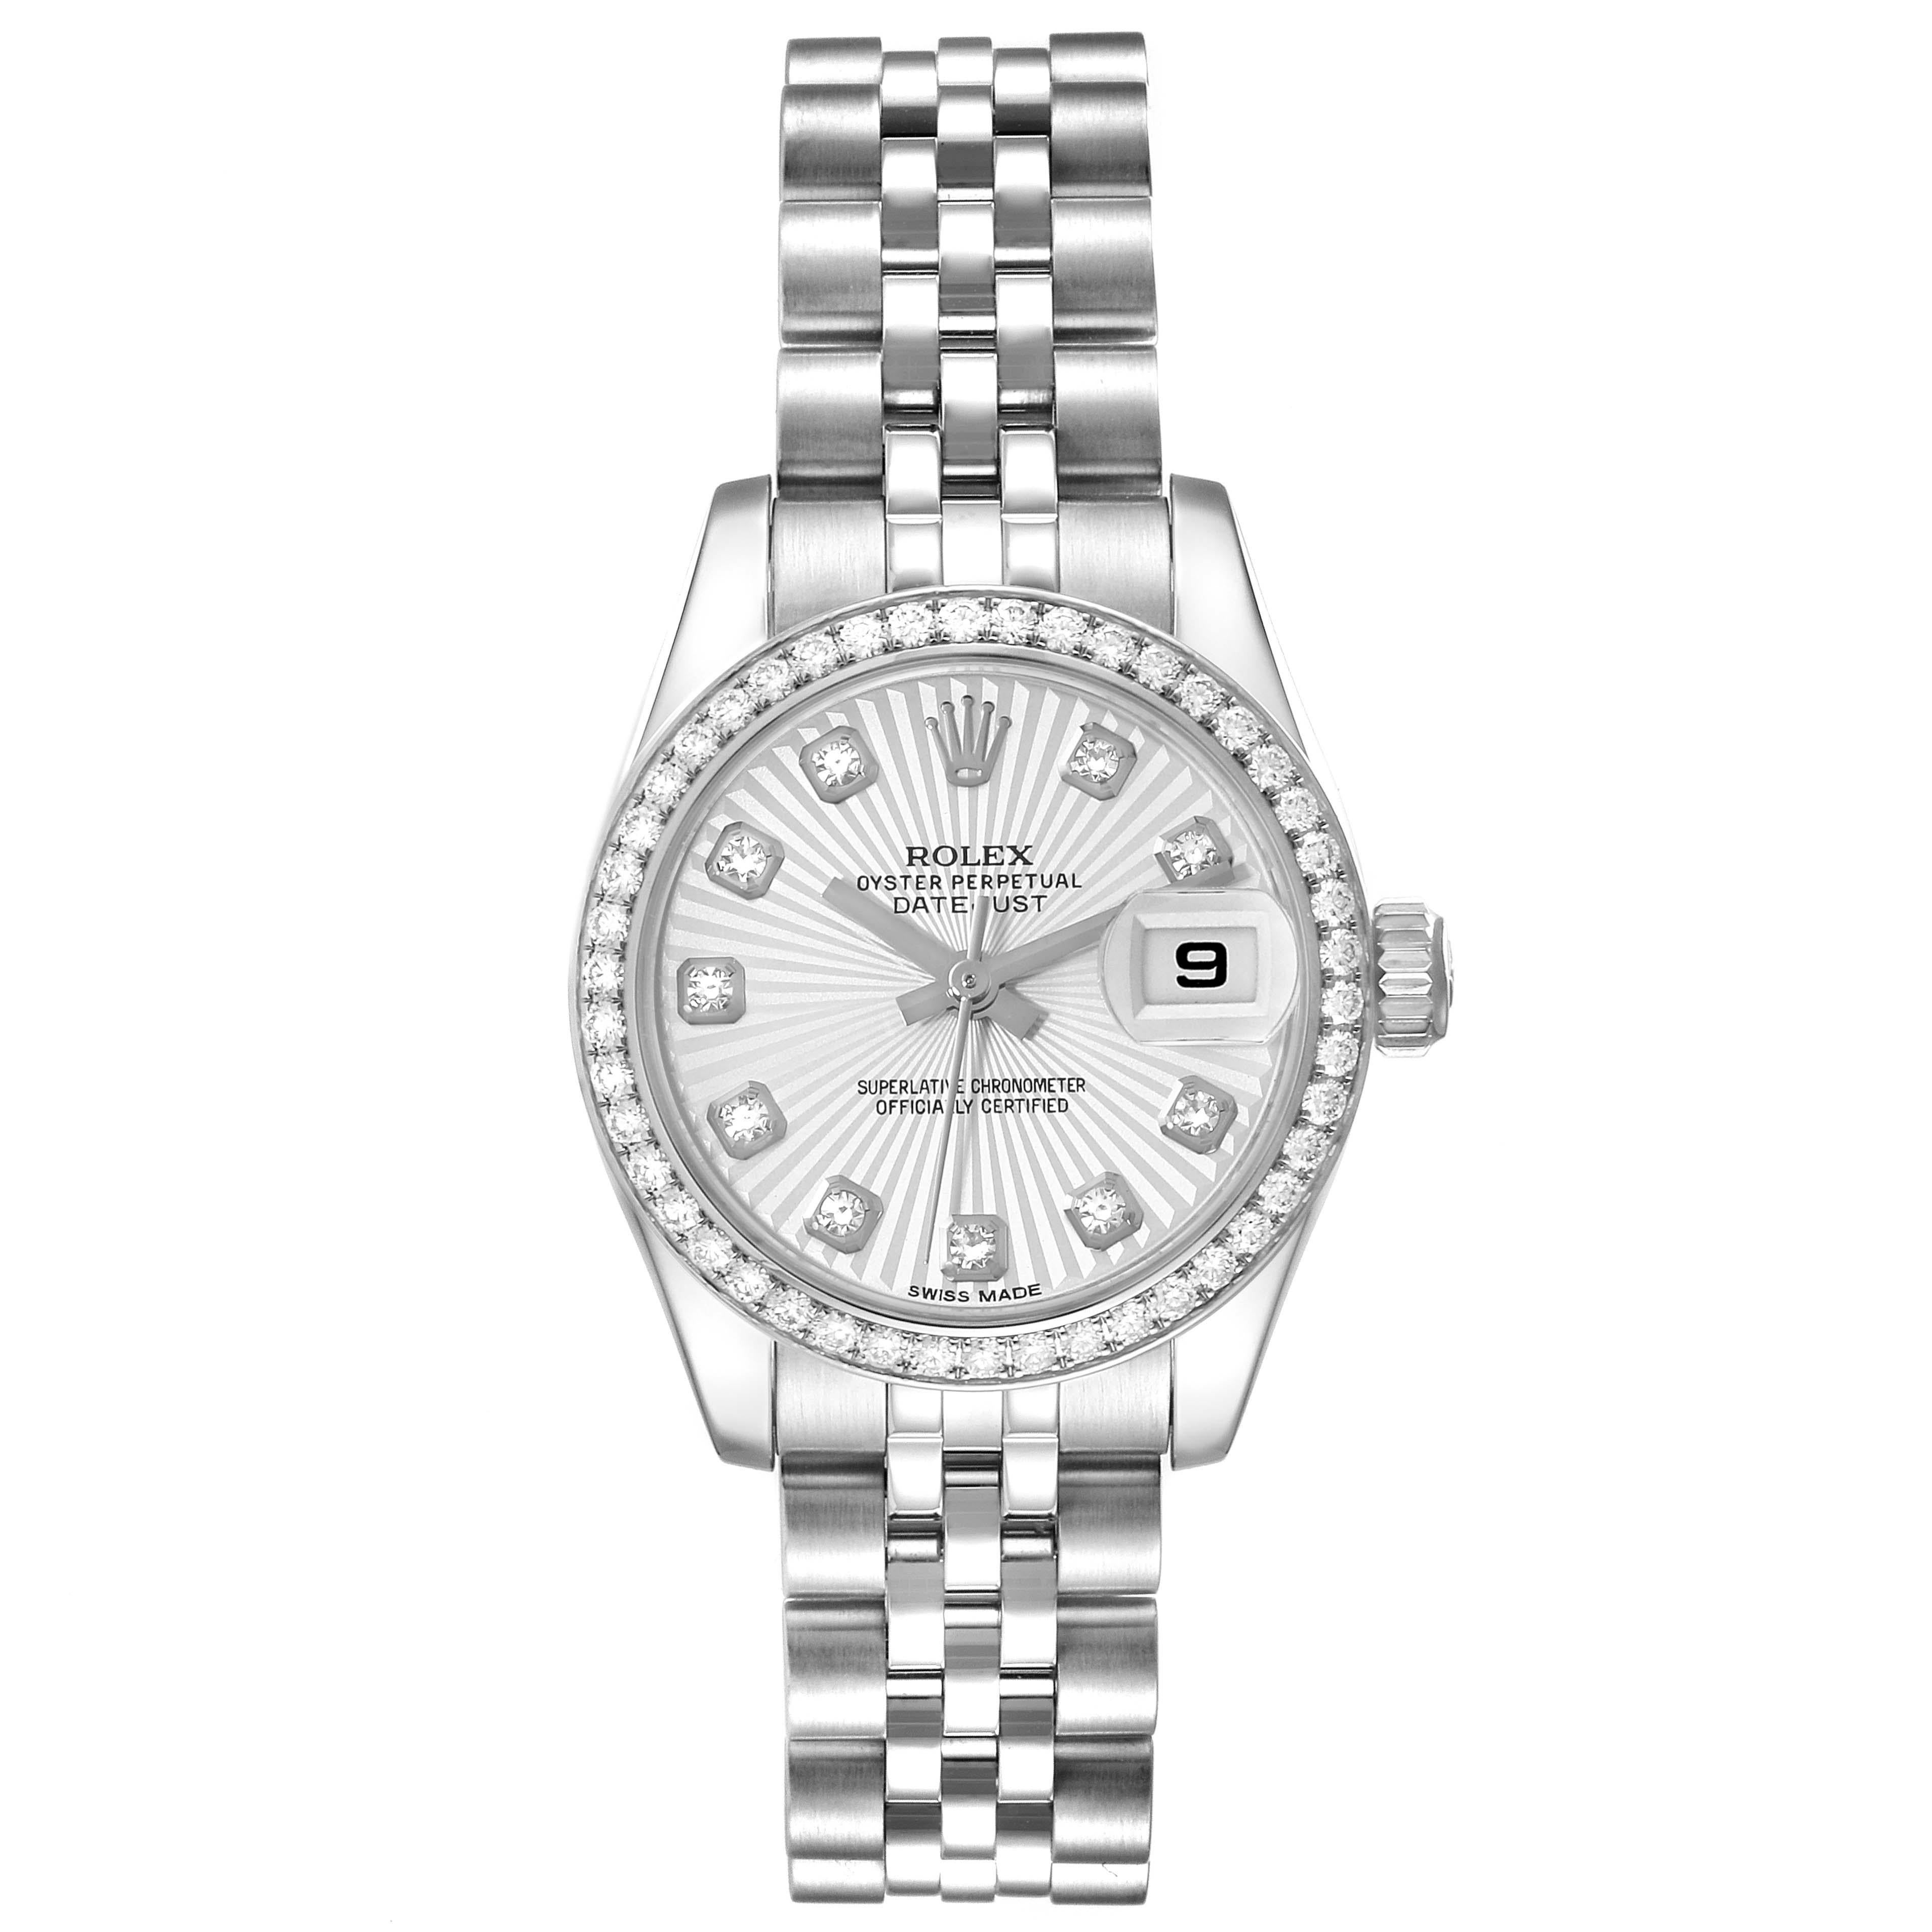 Rolex Datejust 26 Steel White Gold Sunburst Dial Diamond Ladies Watch 179384. Officially certified chronometer automatic self-winding movement. Stainless steel oyster case 26.0 mm in diameter. Rolex logo on a crown. Original Rolex factory diamond